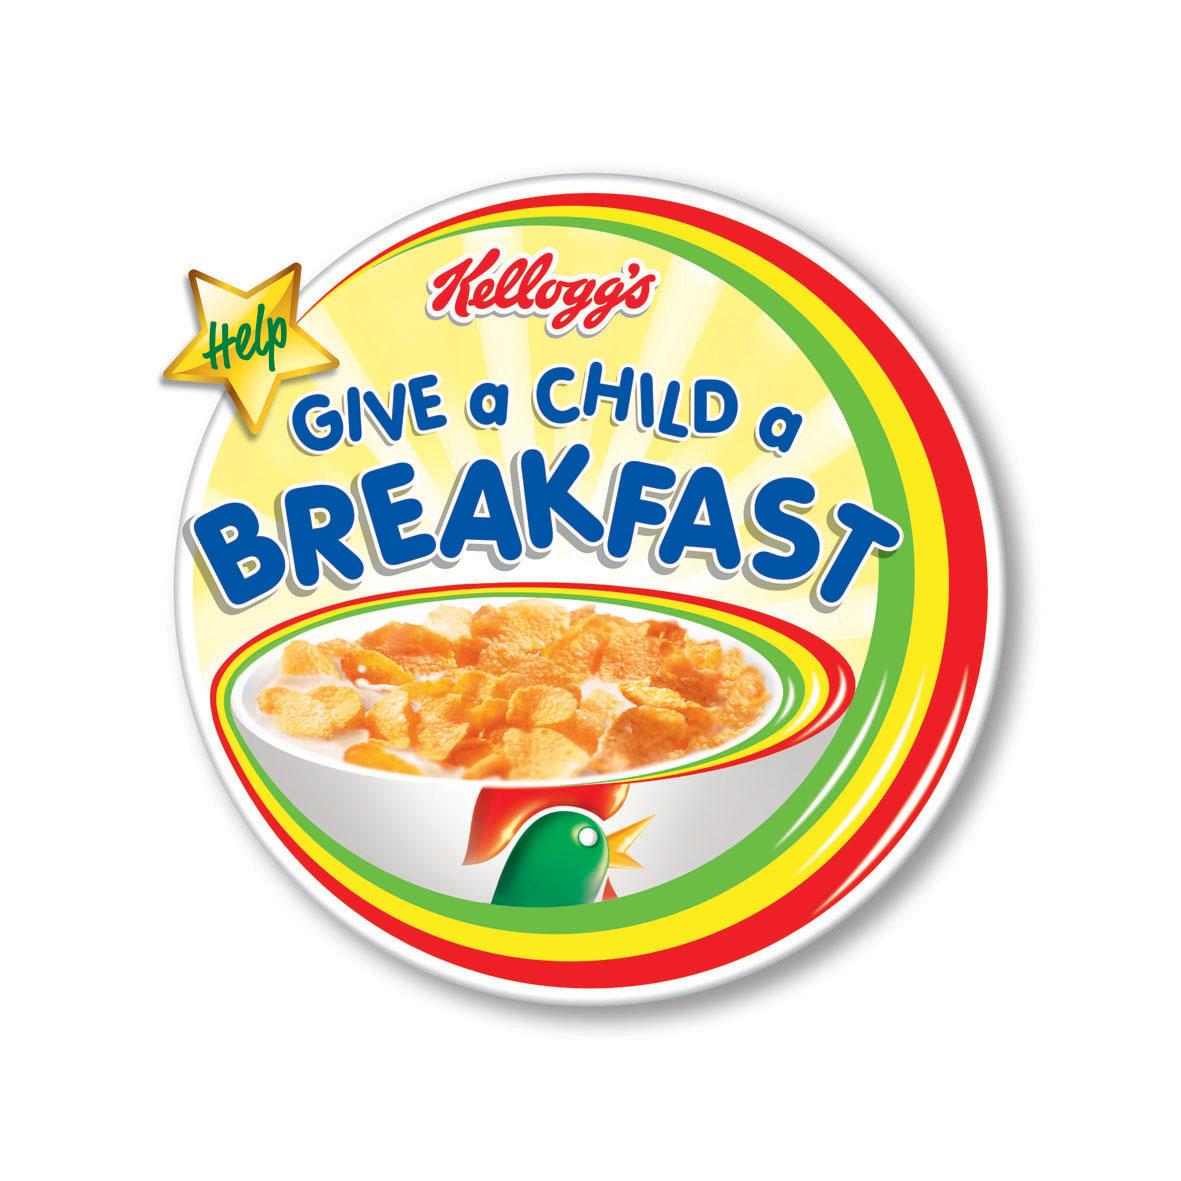 Give a child a breakfast and win a years supply of breakfast for